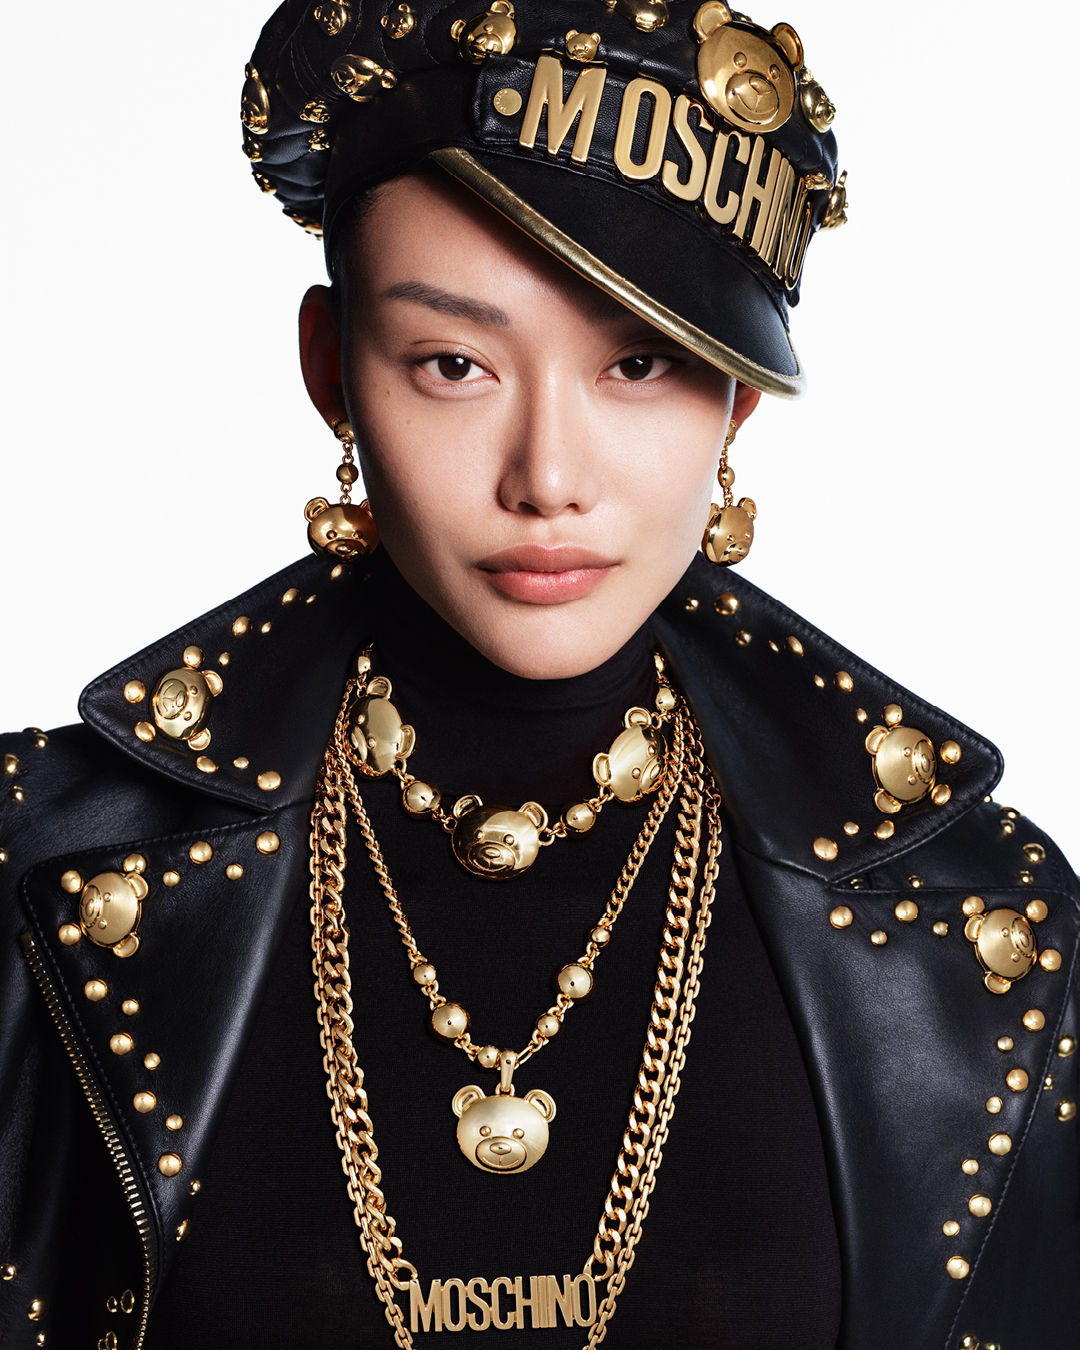 Moschino revives its Bijoux collection with chains and teddy bear charms